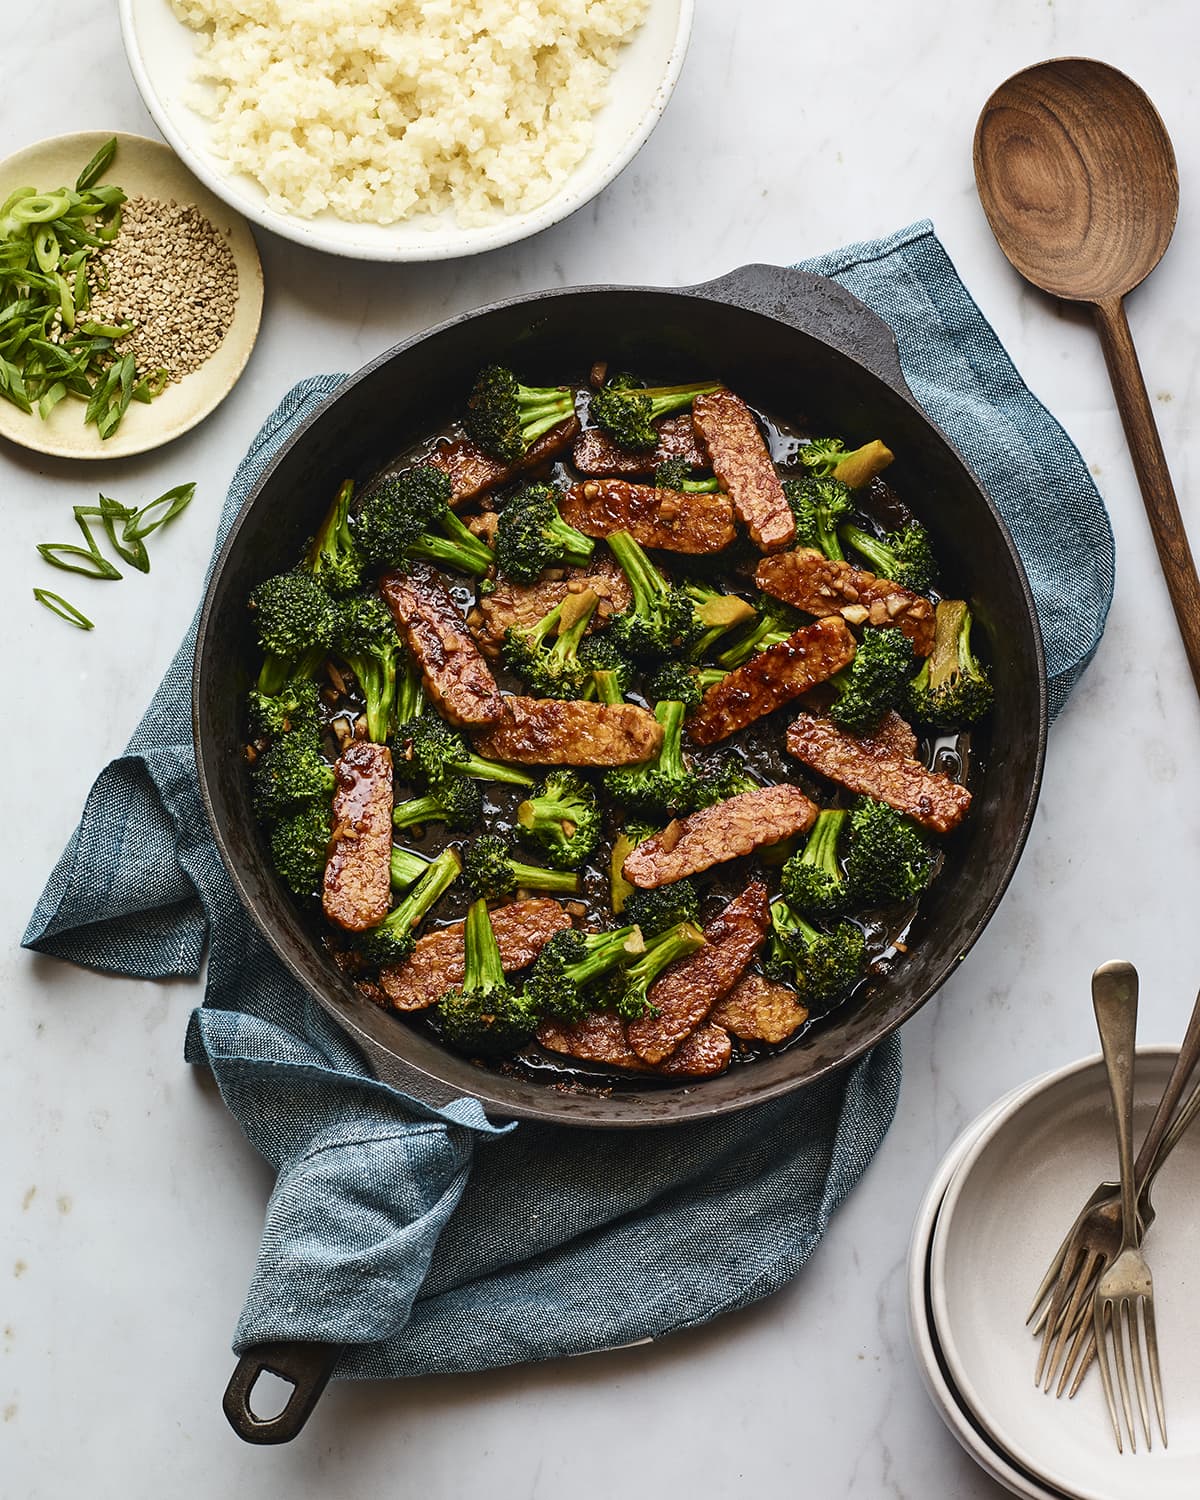 Teriyaki tempeh and broccoli in a cast iron skillet. A cloth towel is under the skillet. A bowl of rice, a wood spoon and bowls and forks are beside the skillet.